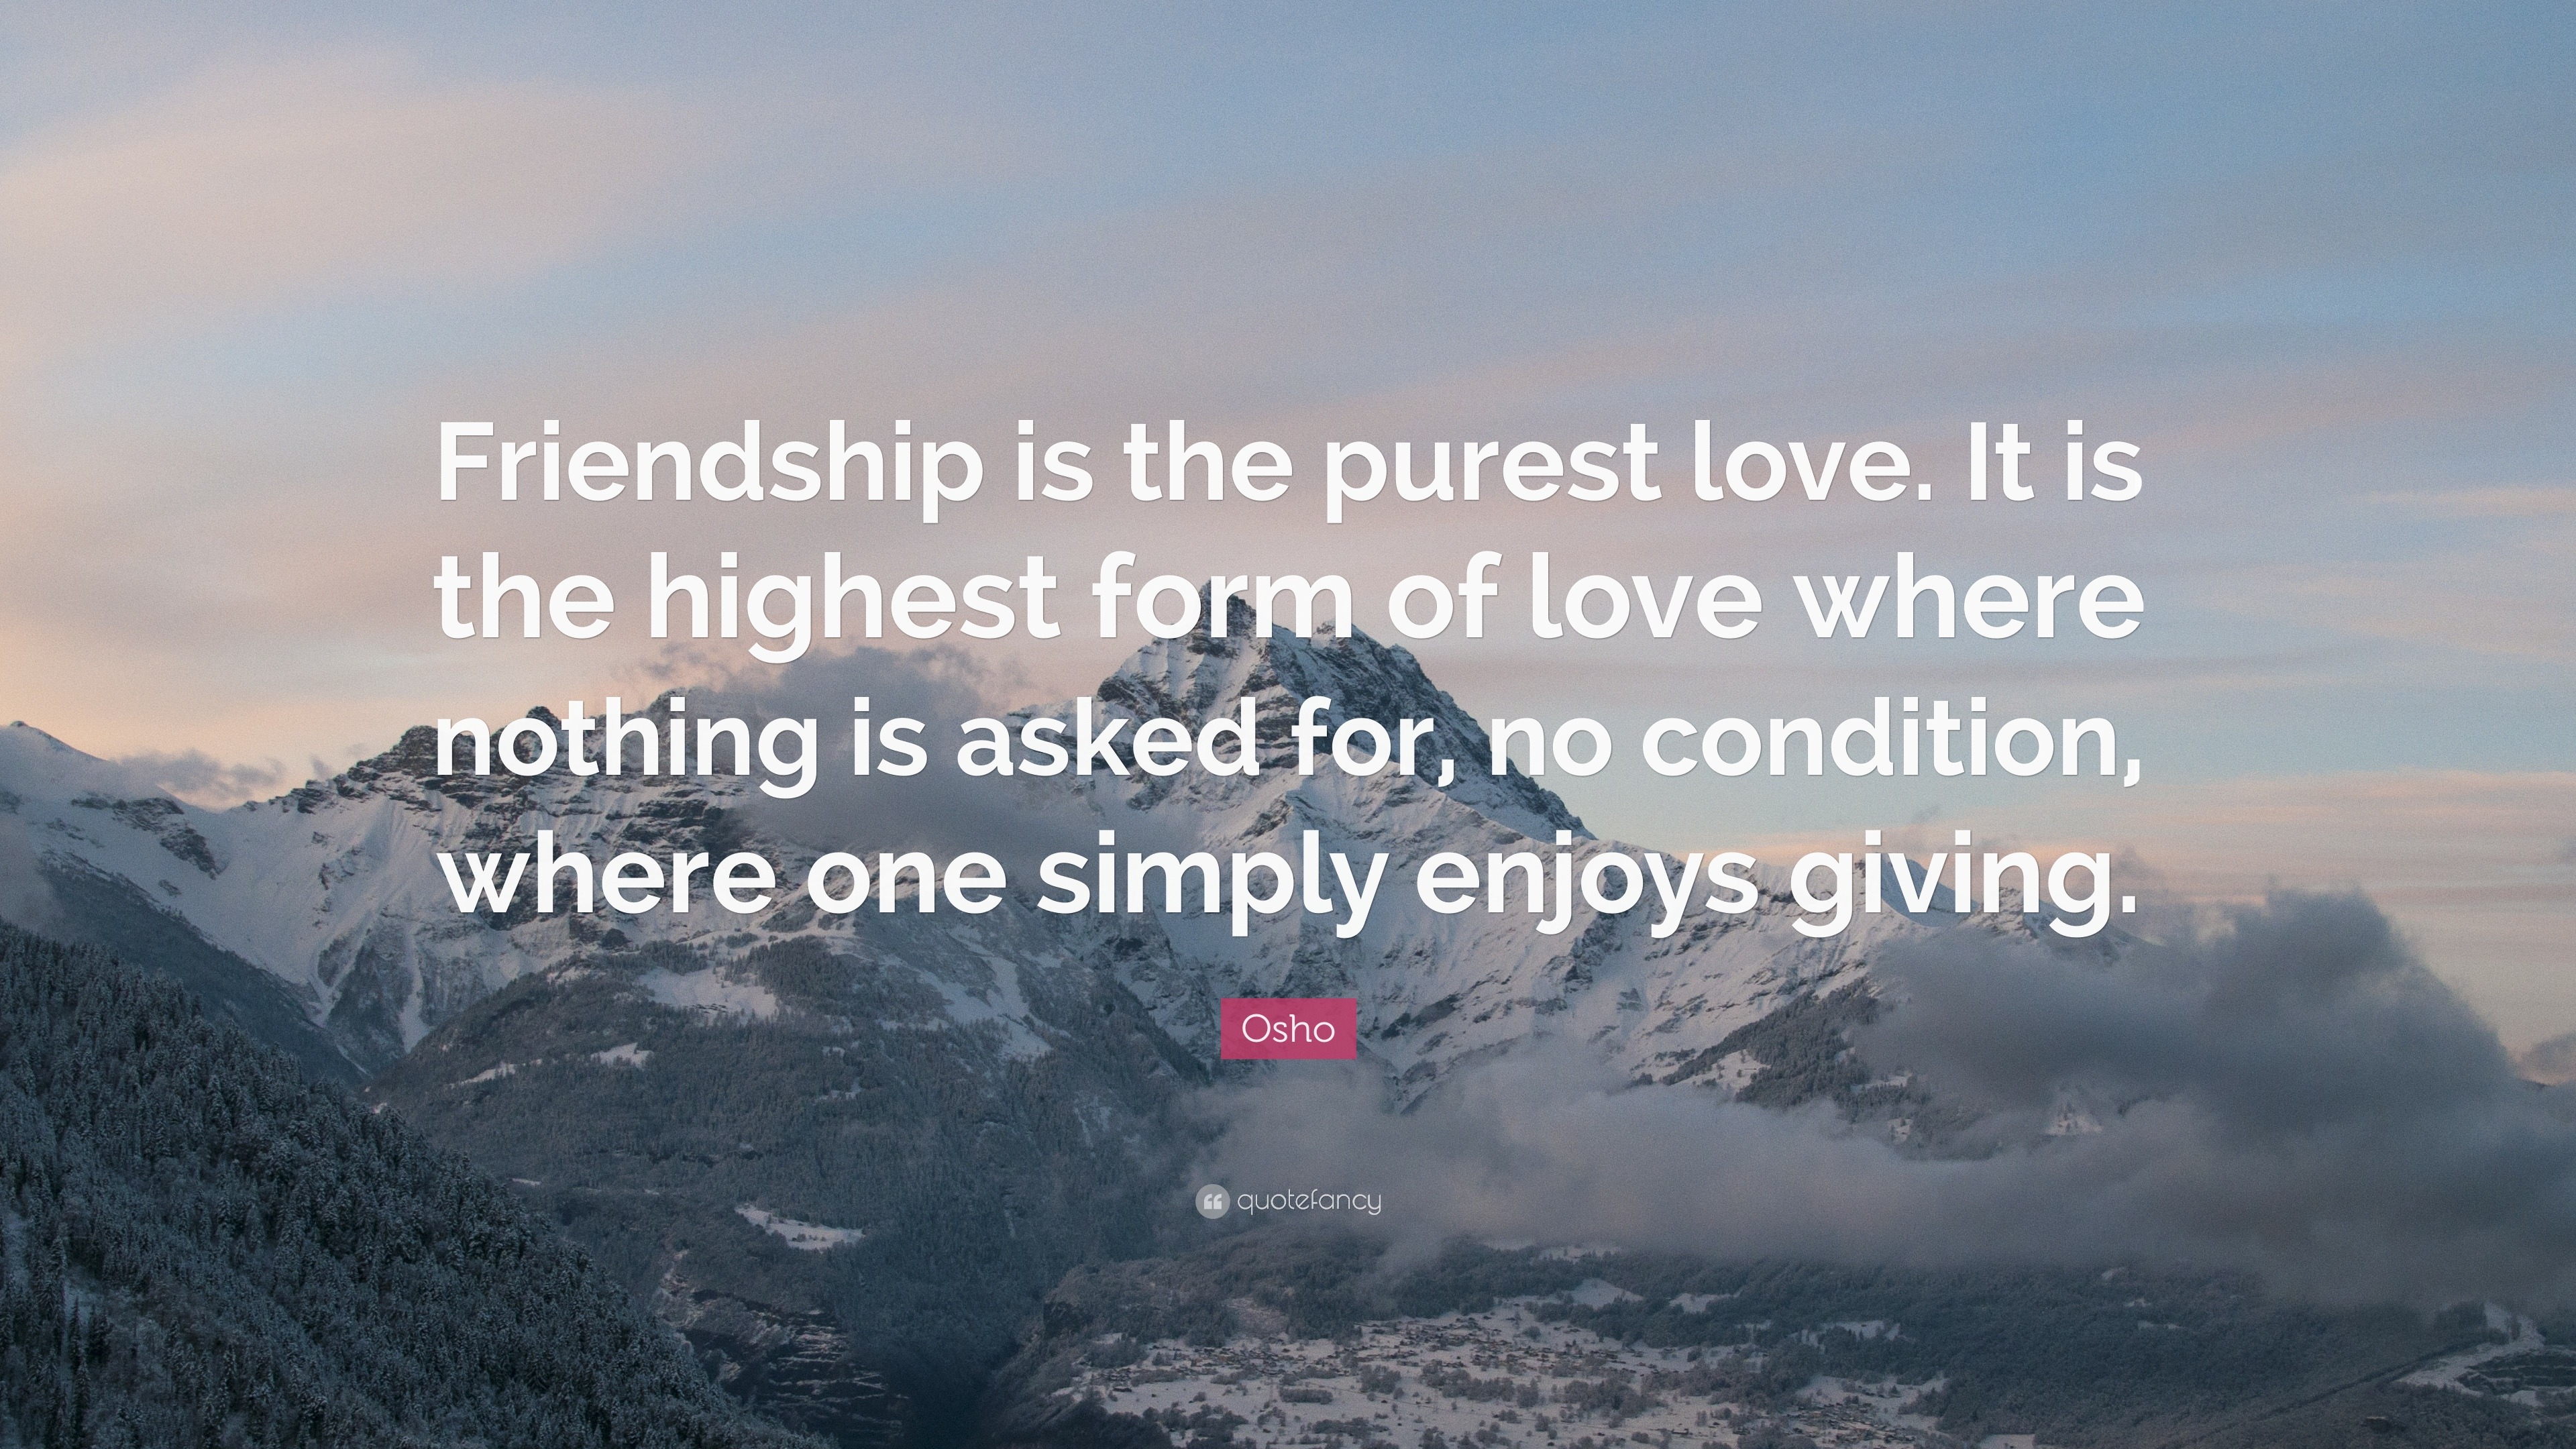 Friendship Quotes From Osho Osho quote friendship is the purest love it